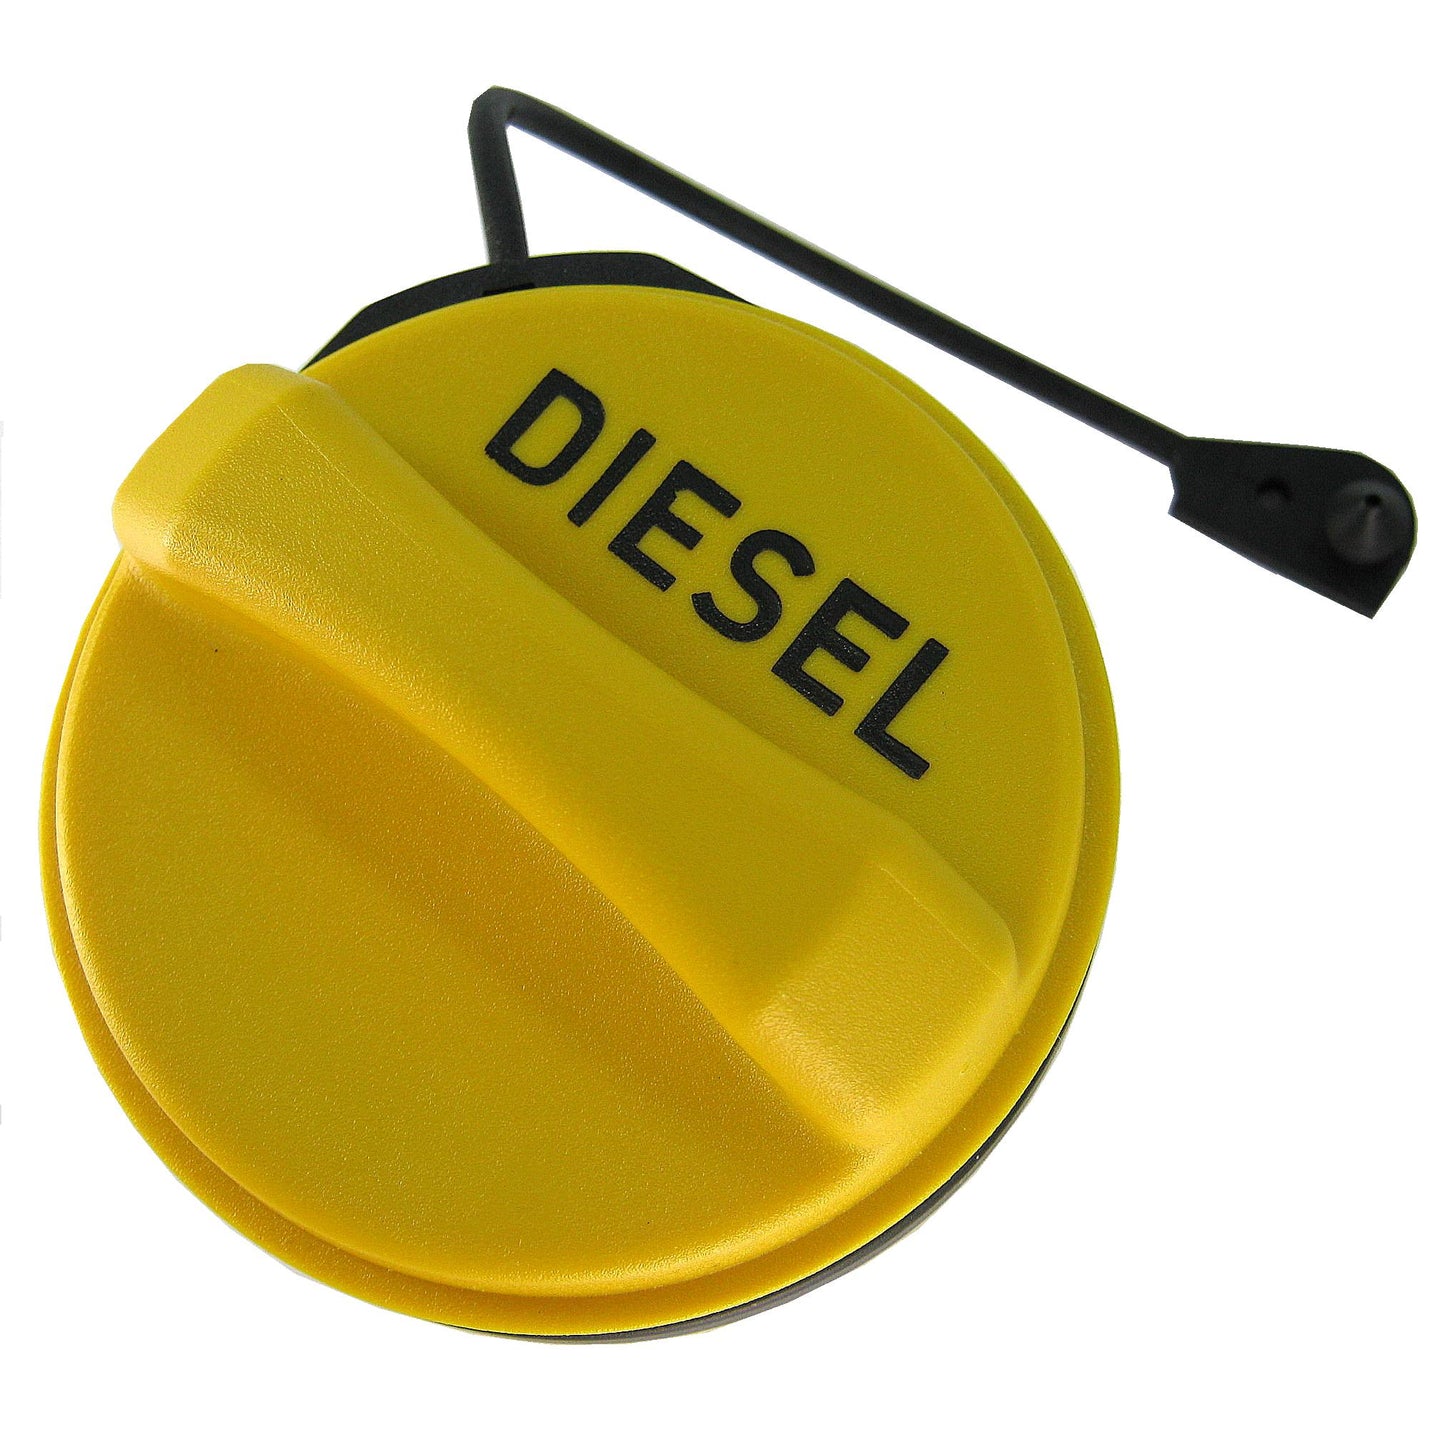 Replacement Fuel Filler Cap  for Land Rover Discovery 3 & 4 - Genuine - Diesel